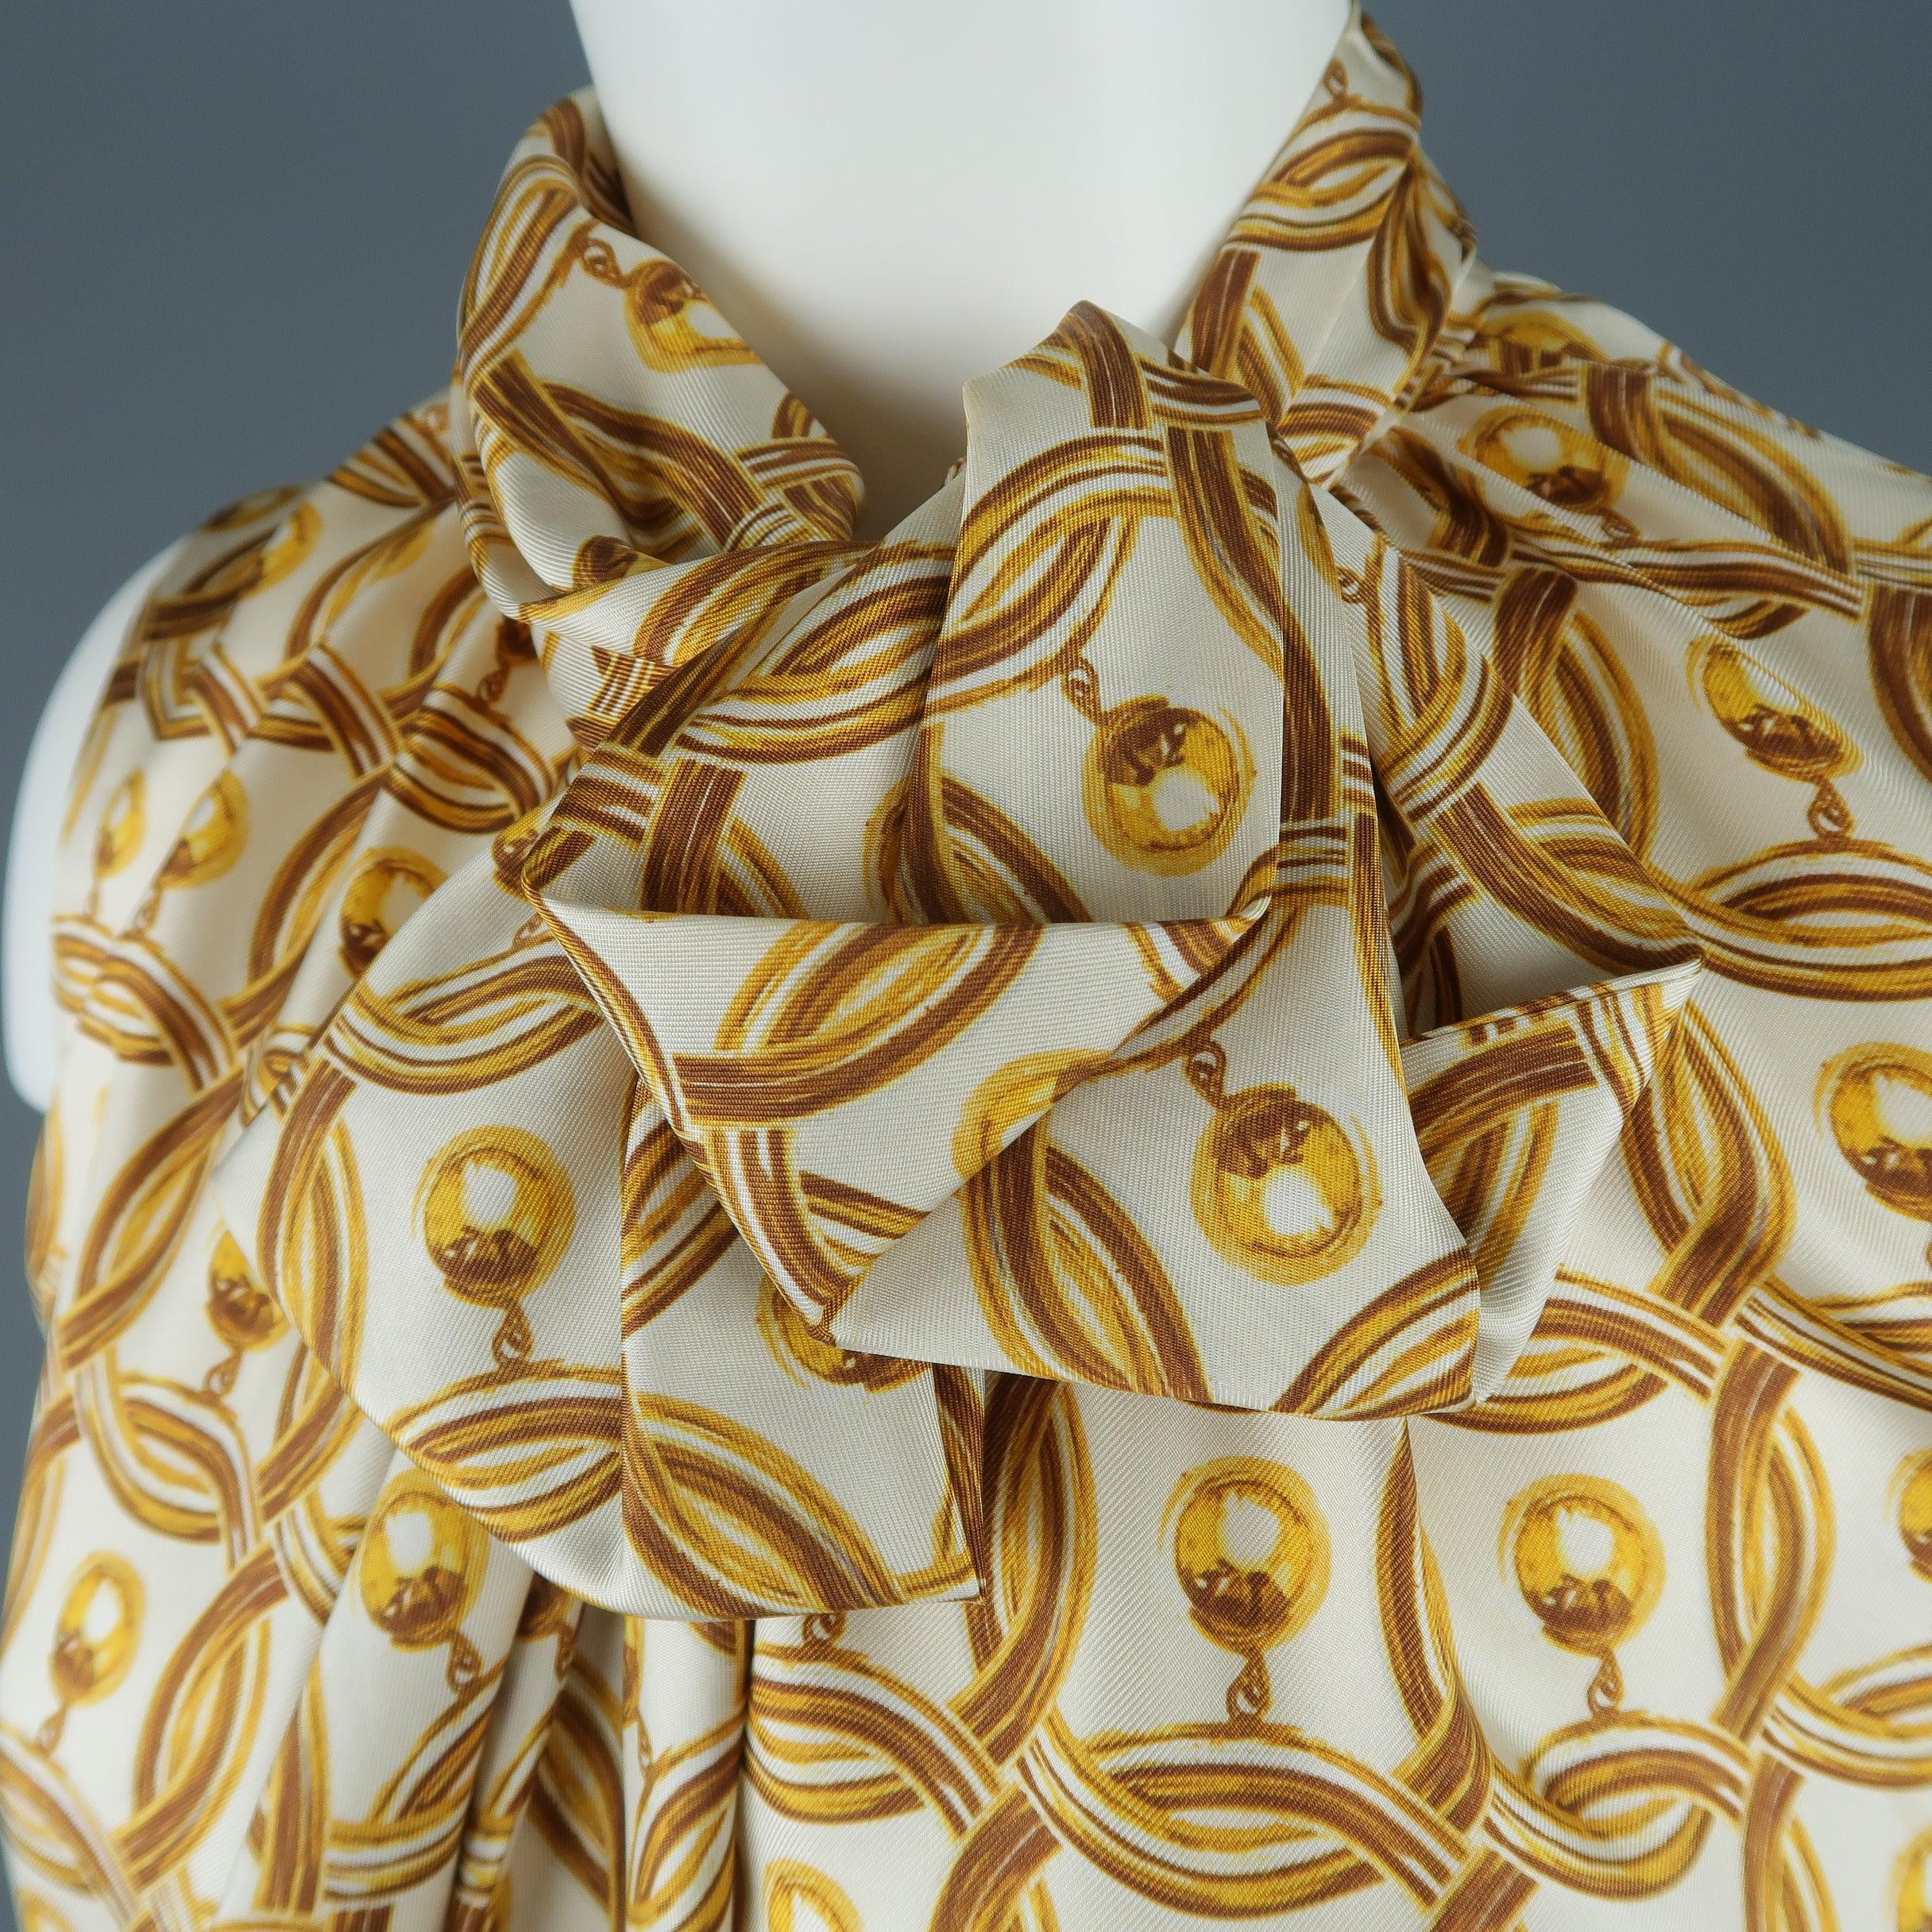 MOSCHINO Size 6 Gold & Cream Hoop Earring Print Silk Bow Dress Top In Excellent Condition For Sale In San Francisco, CA